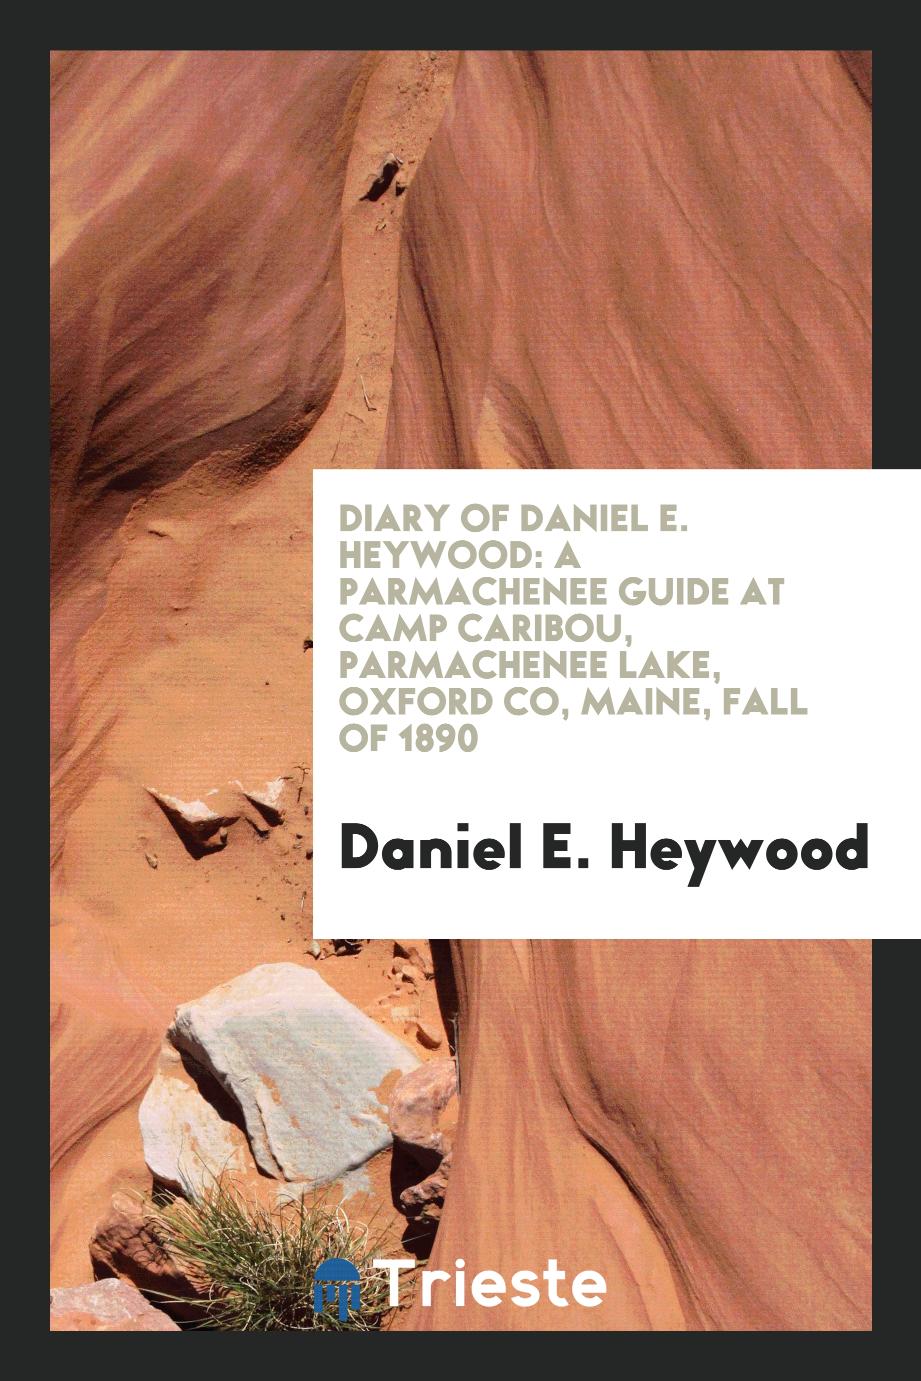 Diary of Daniel E. Heywood: A Parmachenee Guide at Camp Caribou, Parmachenee Lake, Oxford Co, Maine, Fall of 1890